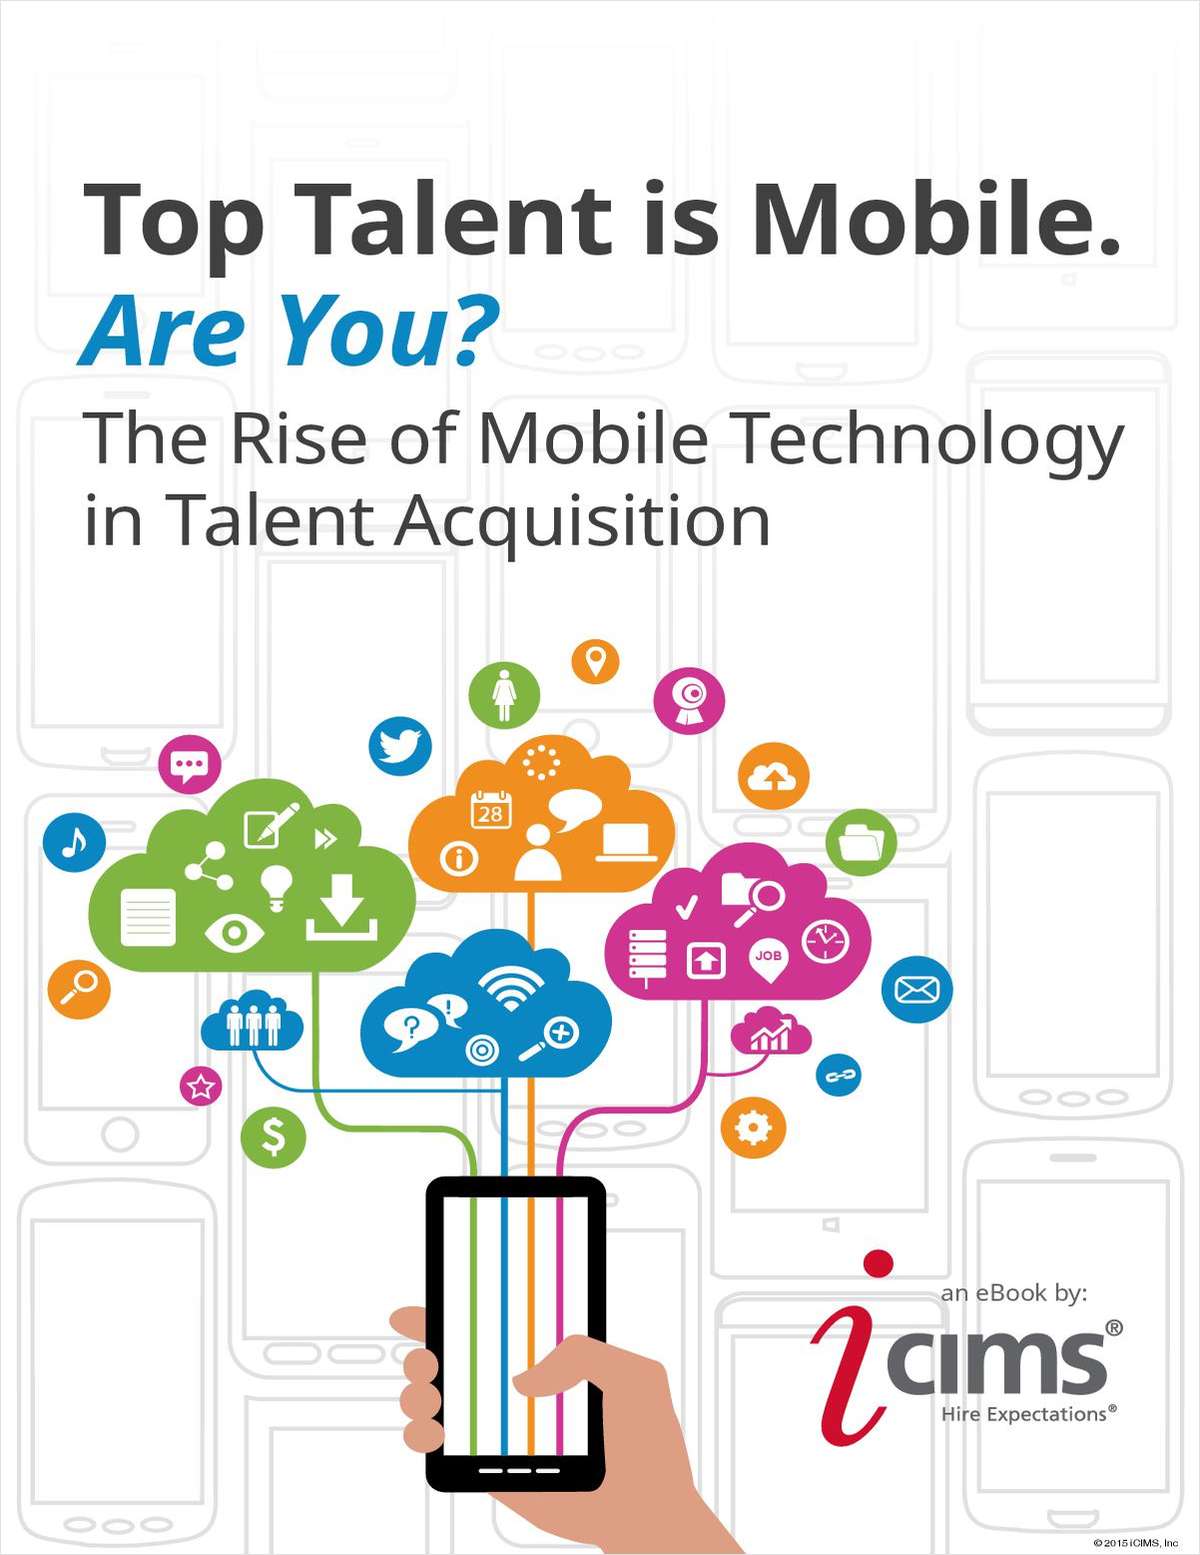 Top Talent is Mobile. Are You?